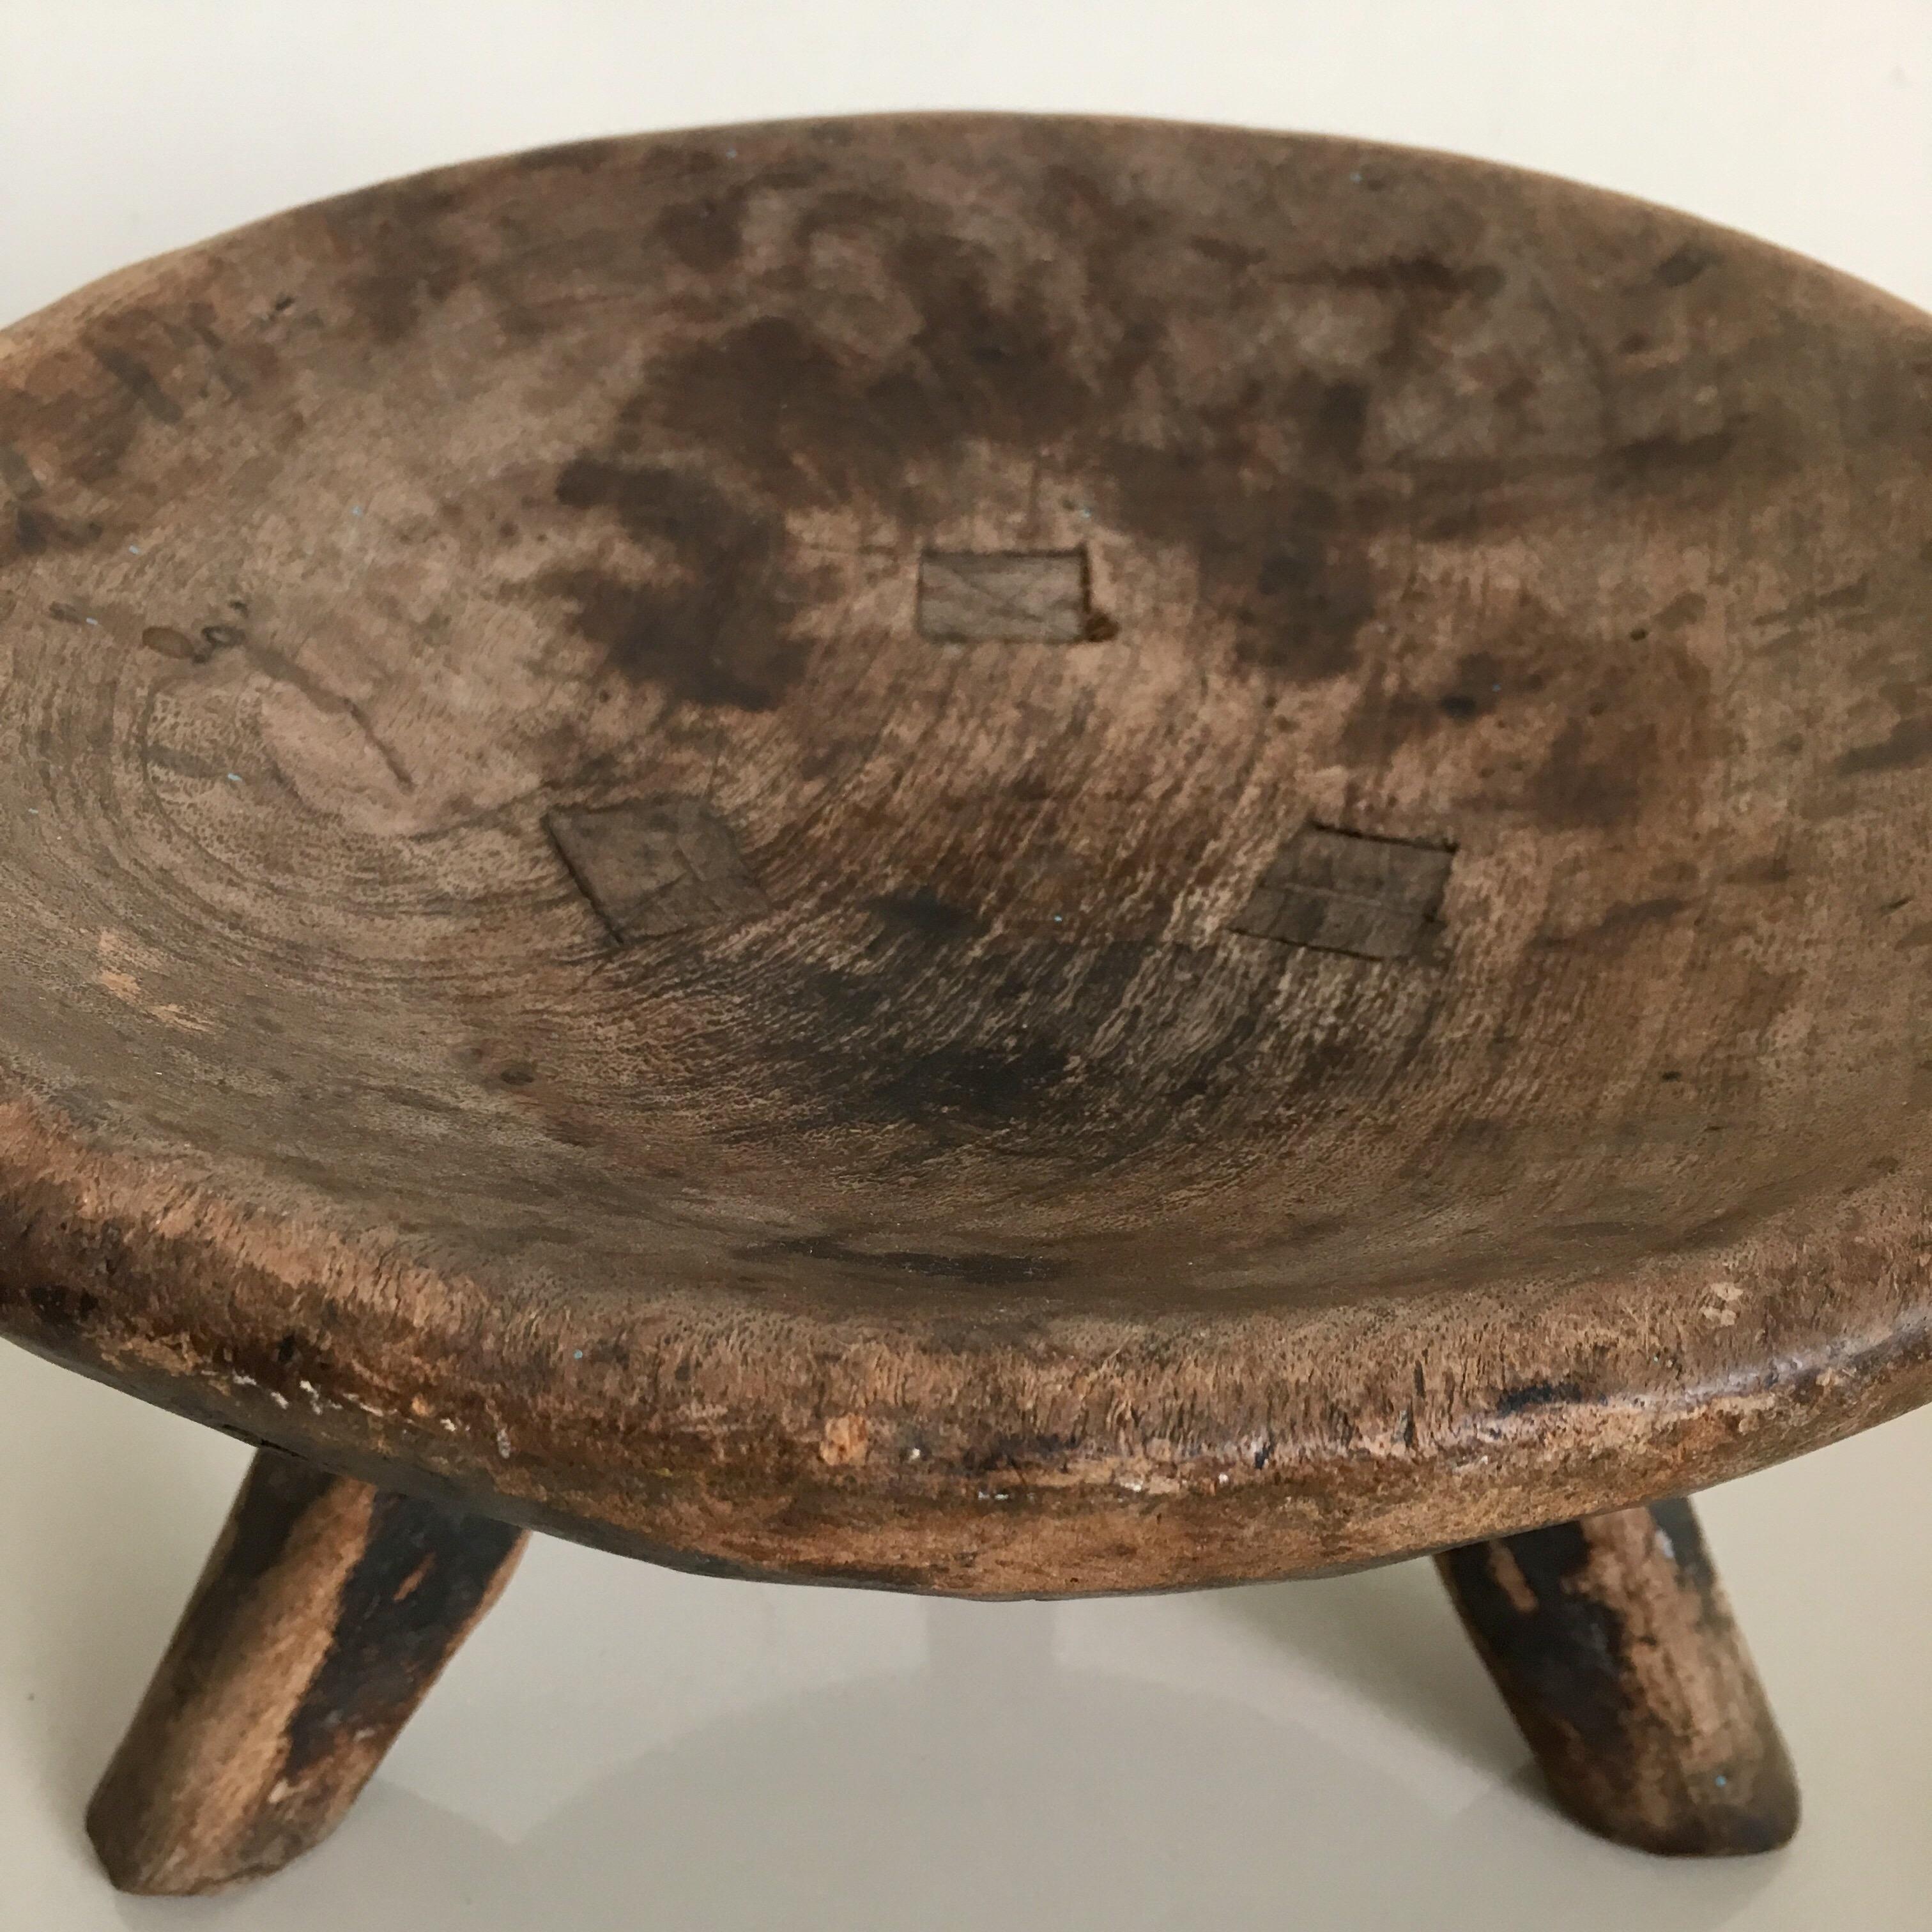 Rustic Dome Stool from Mexico